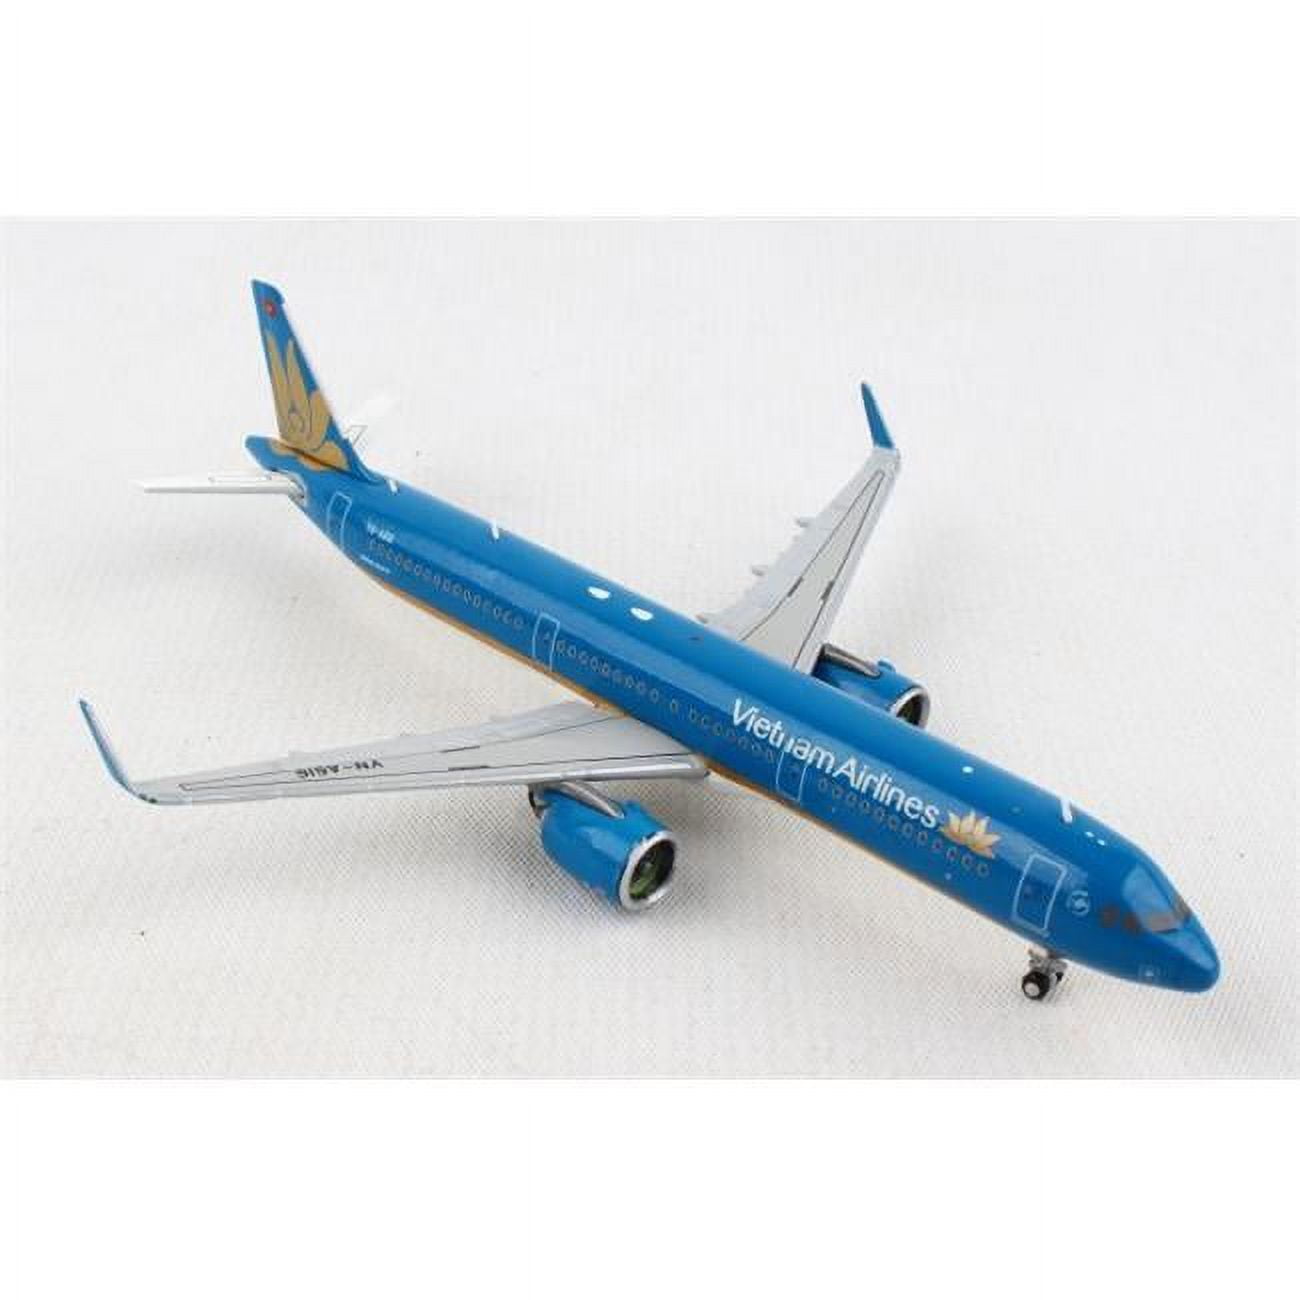 Gemini Jets Gj1835 Vietnam Airlines A321neo Diecast Model Aircraft, Scale 1 By 400 Reg No. Vn-a616